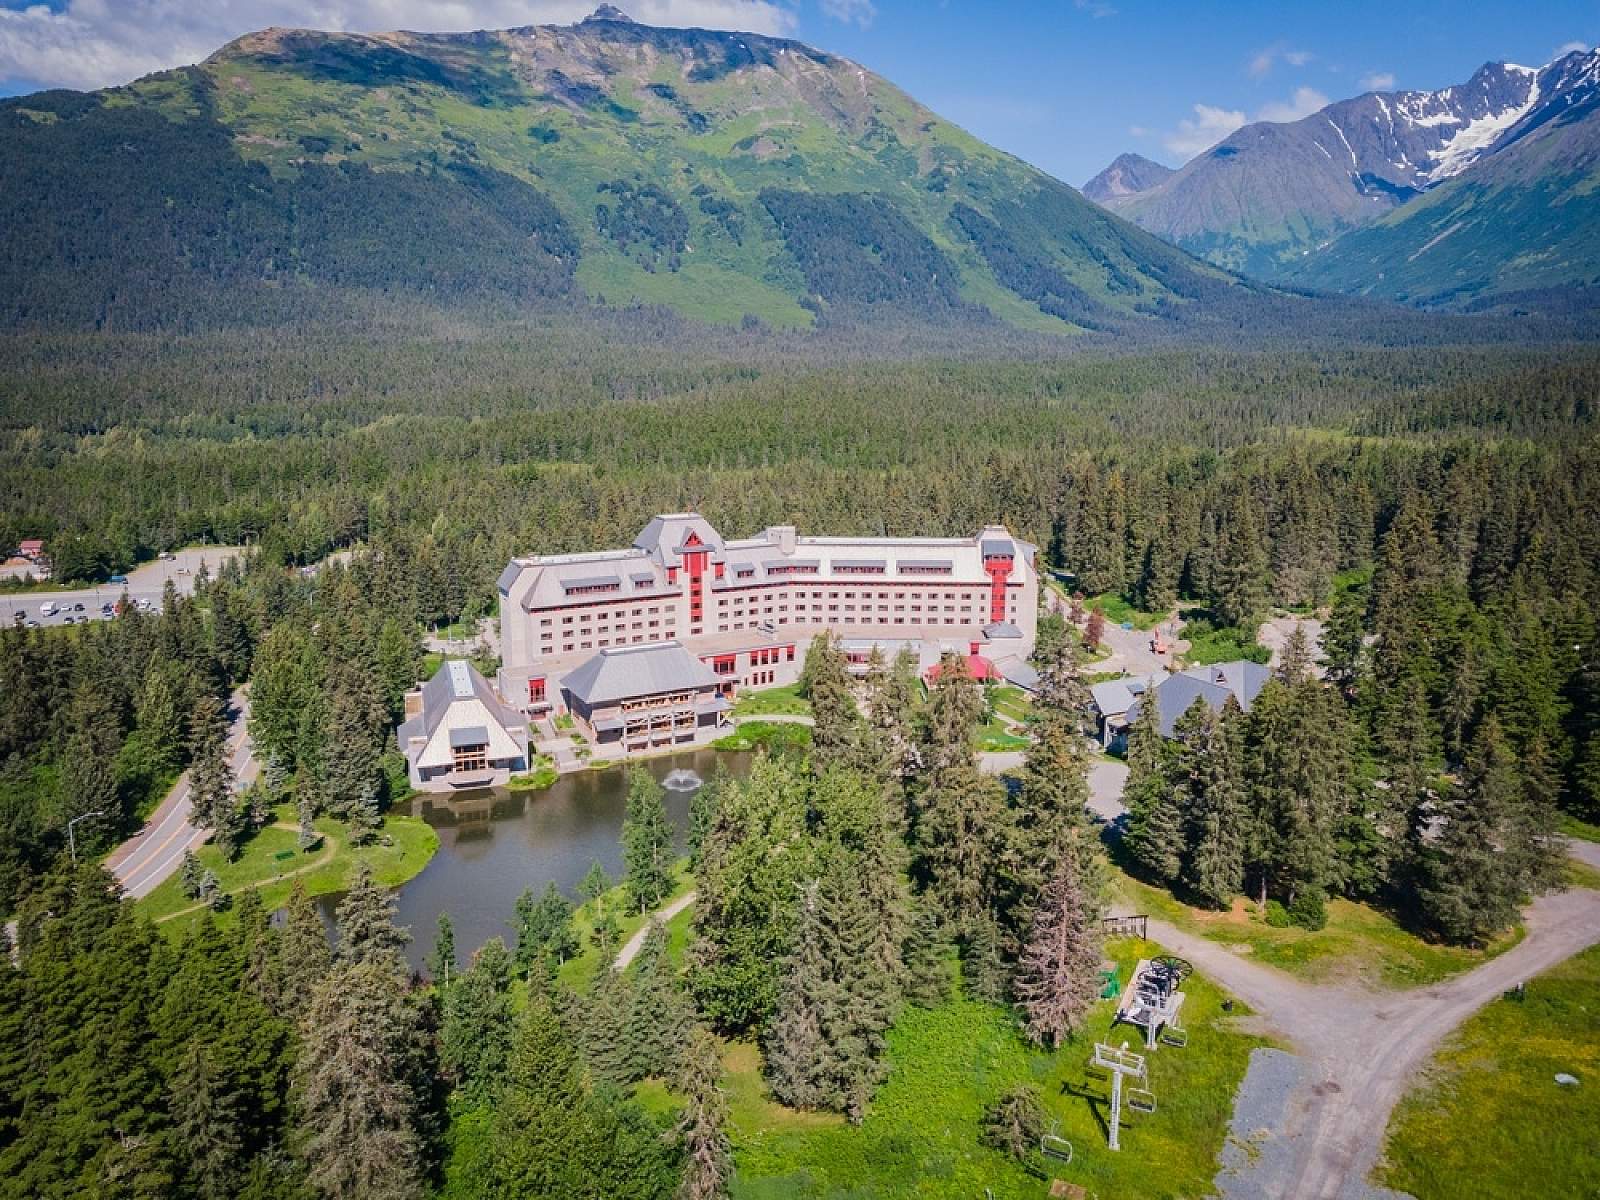 This resort is a great wilderness stay.
Pictured: Alyeska Resort